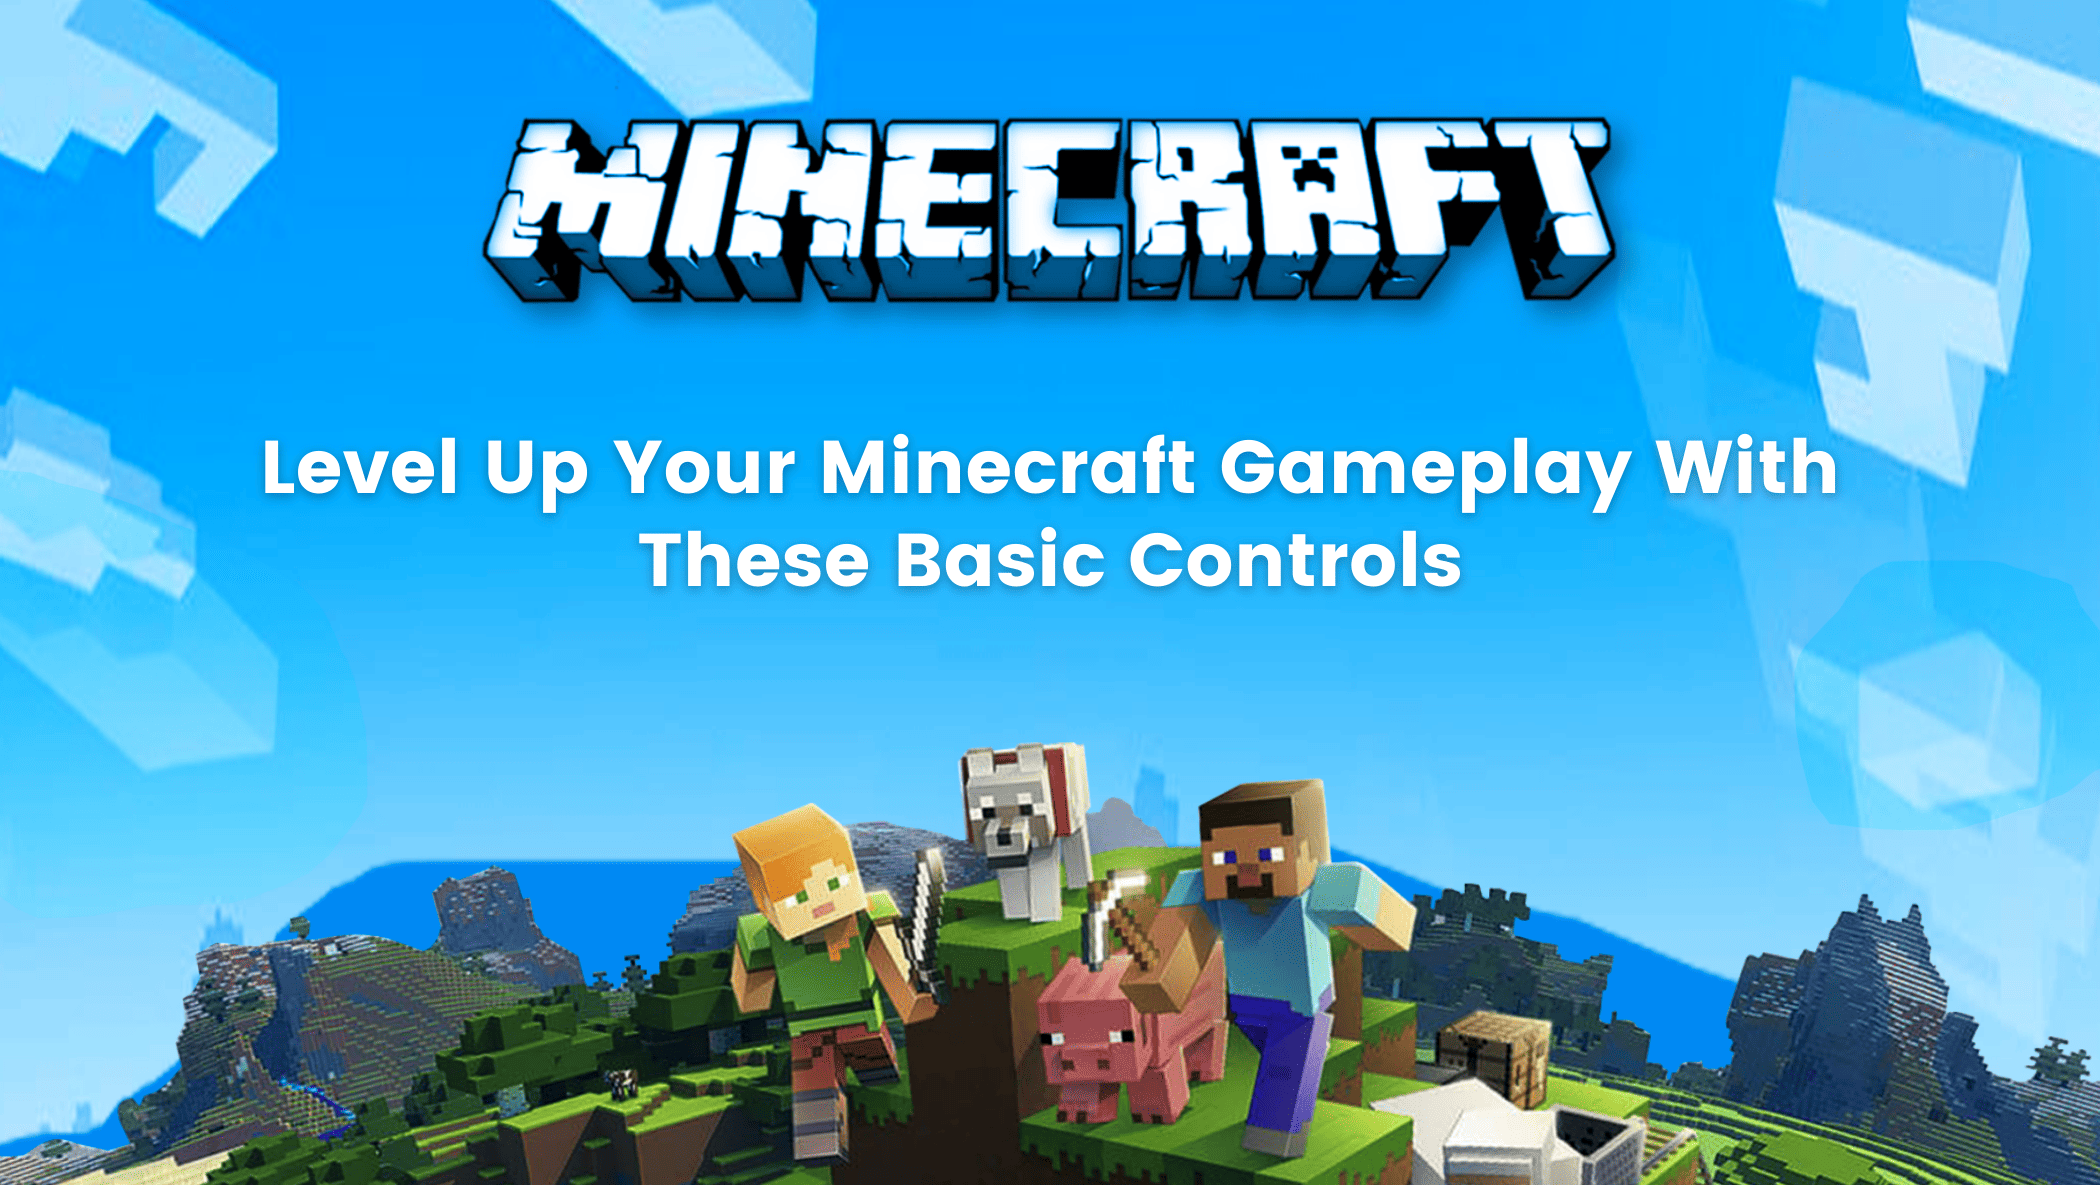 Level Up Your Minecraft Gameplay With These Basic Controls